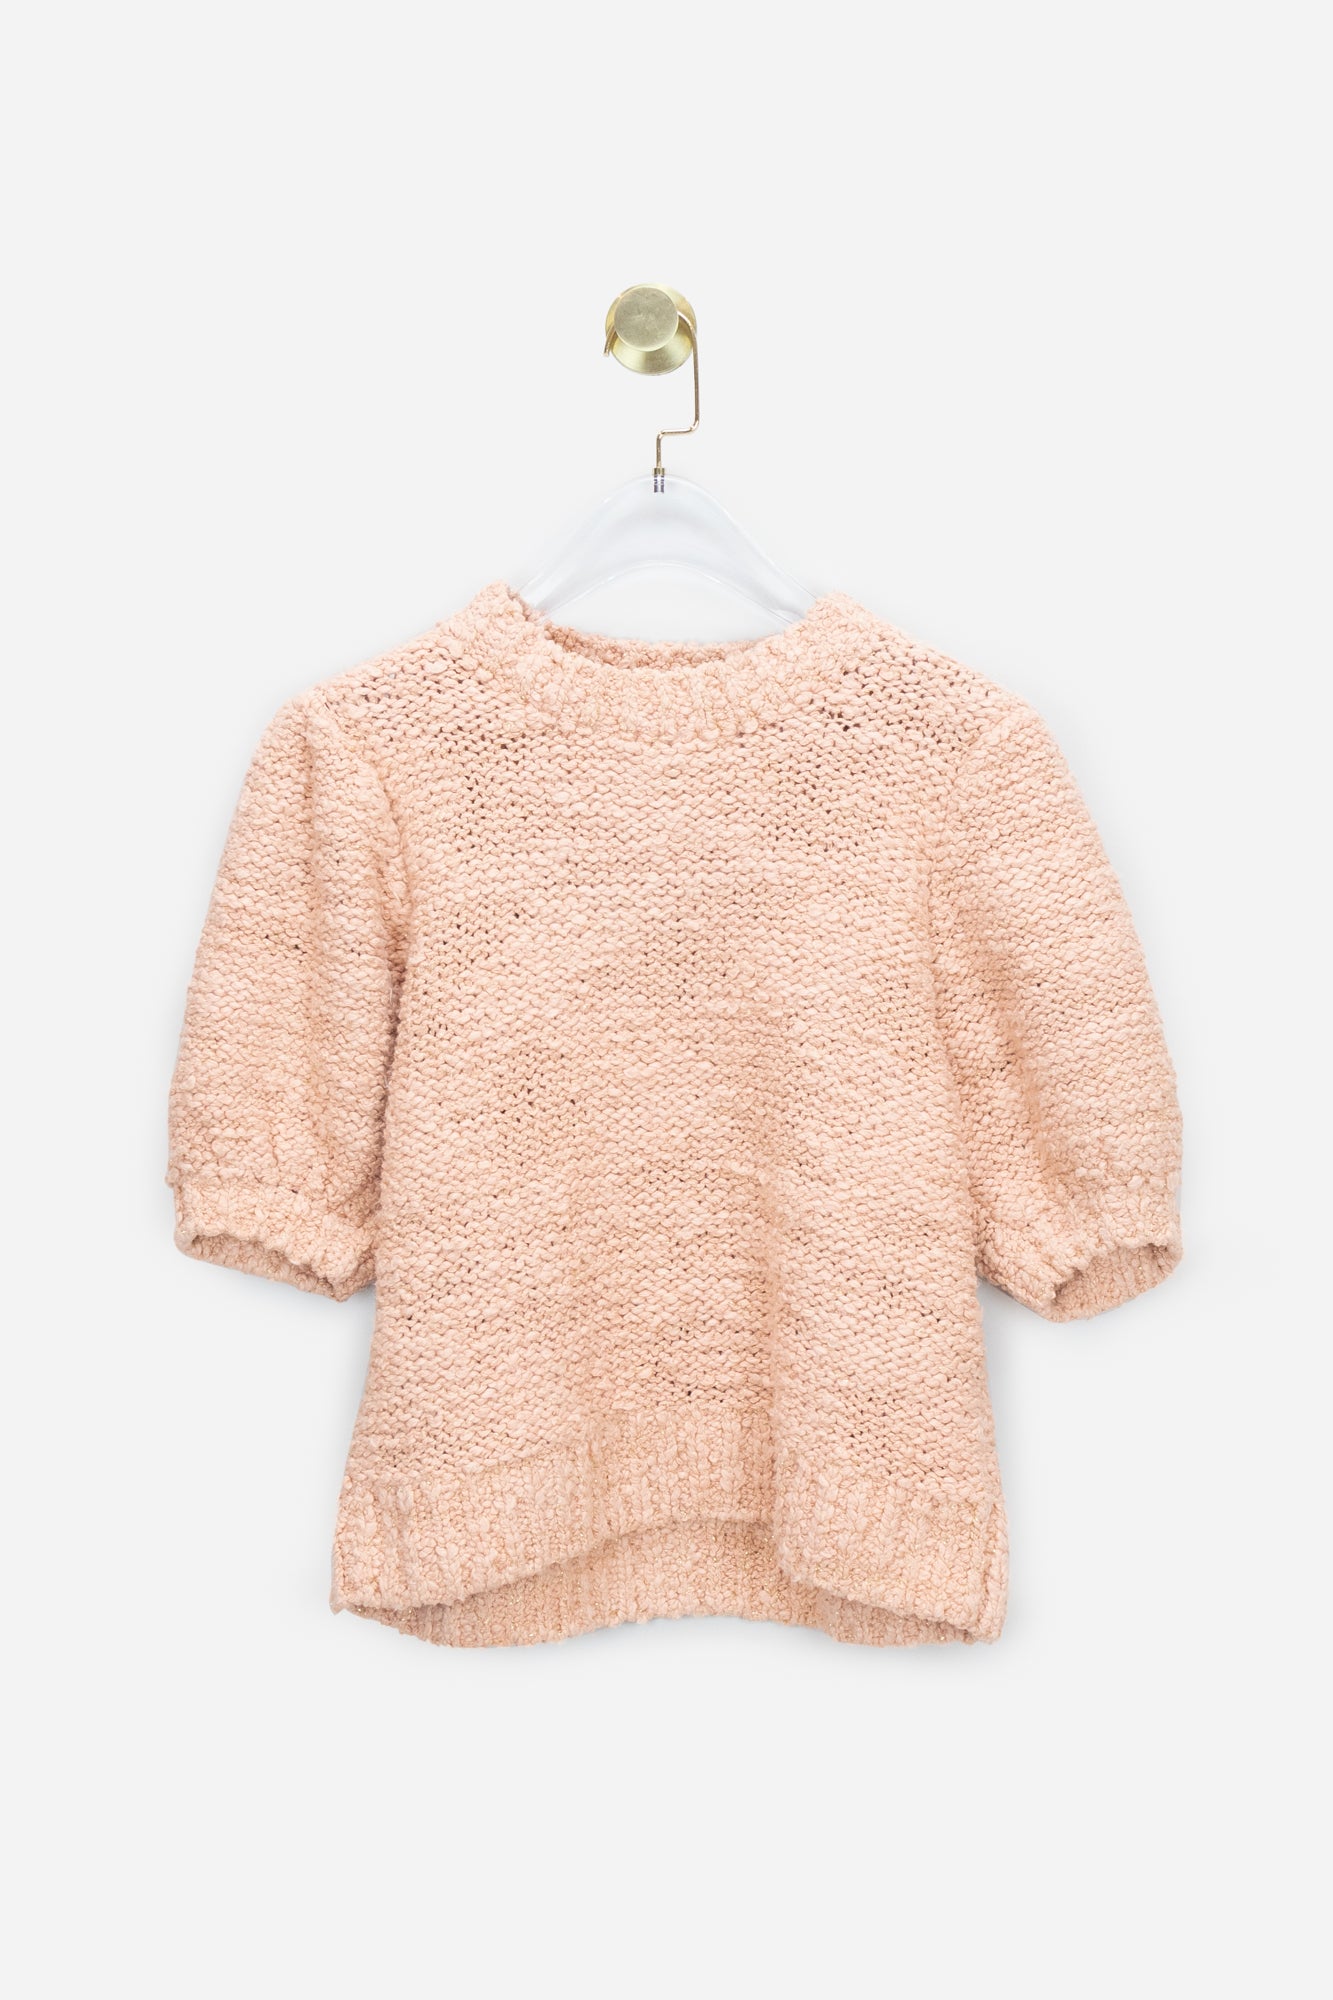 Salmon Pink Puff Sleeve Chunky Knit Top - So Over It Luxury Consignment